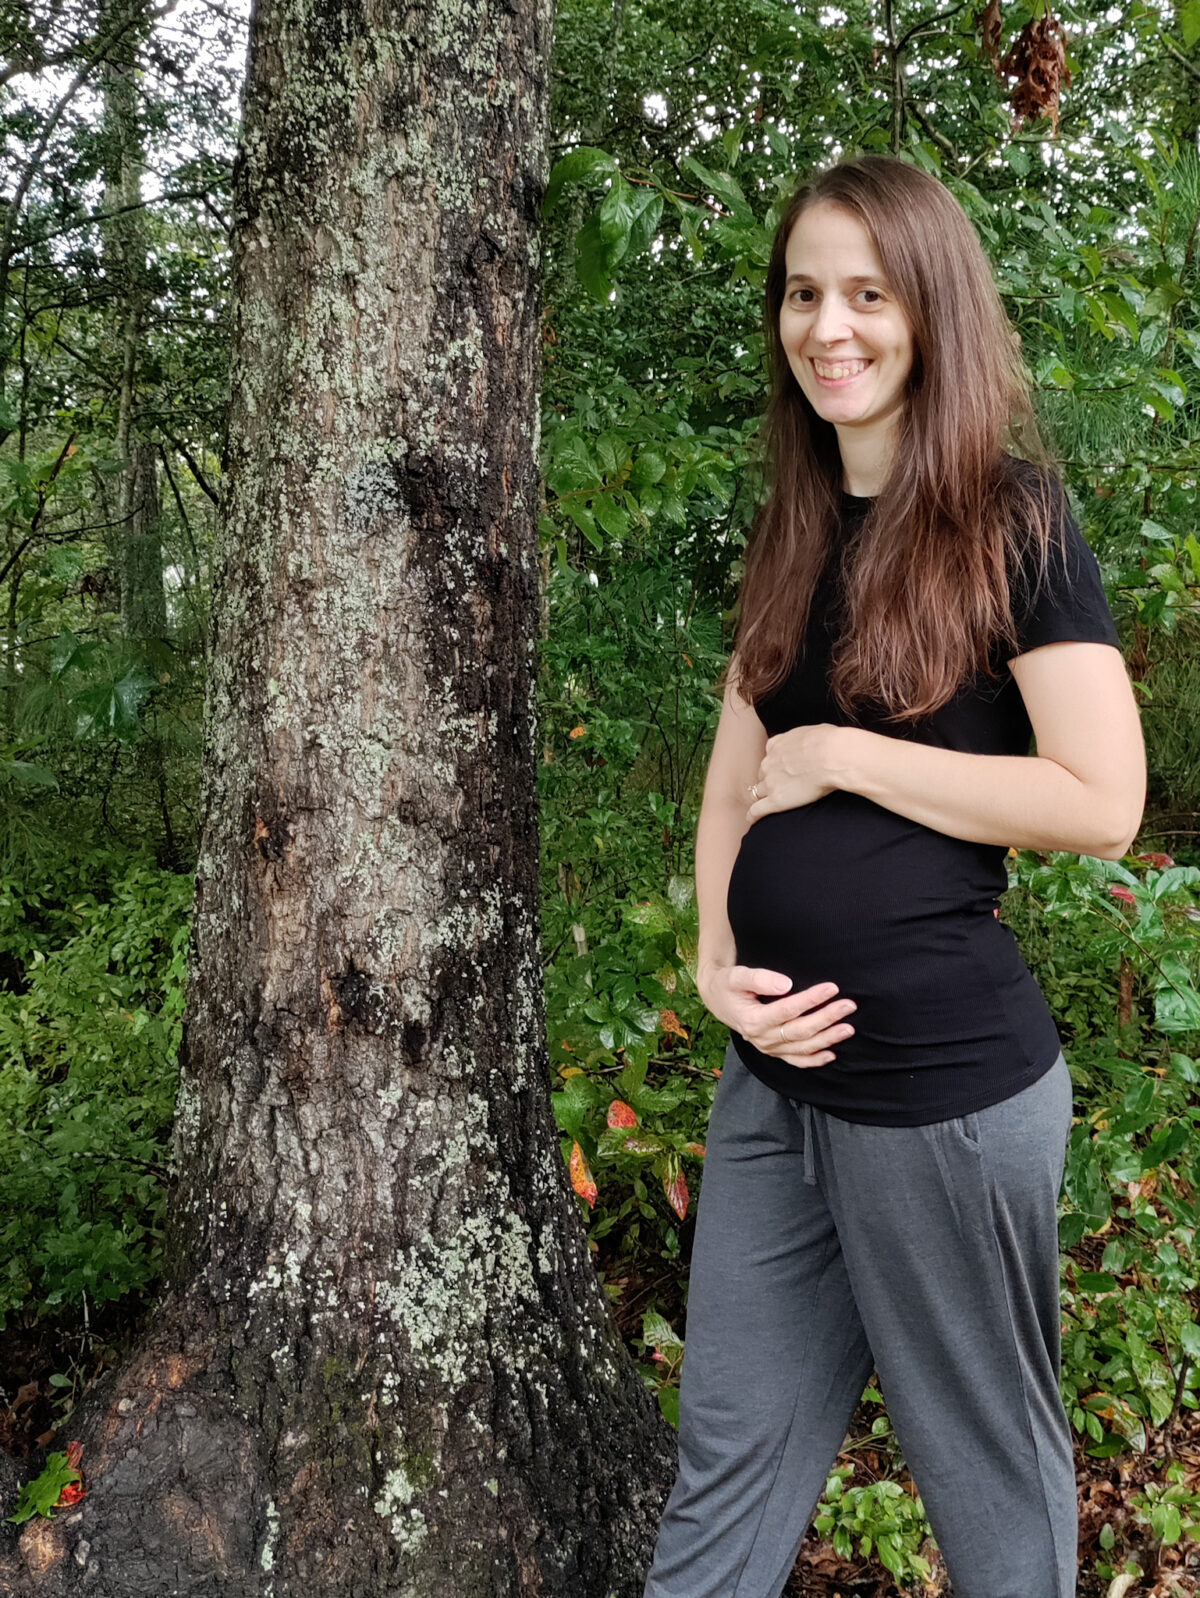 Pregnant woman by tree